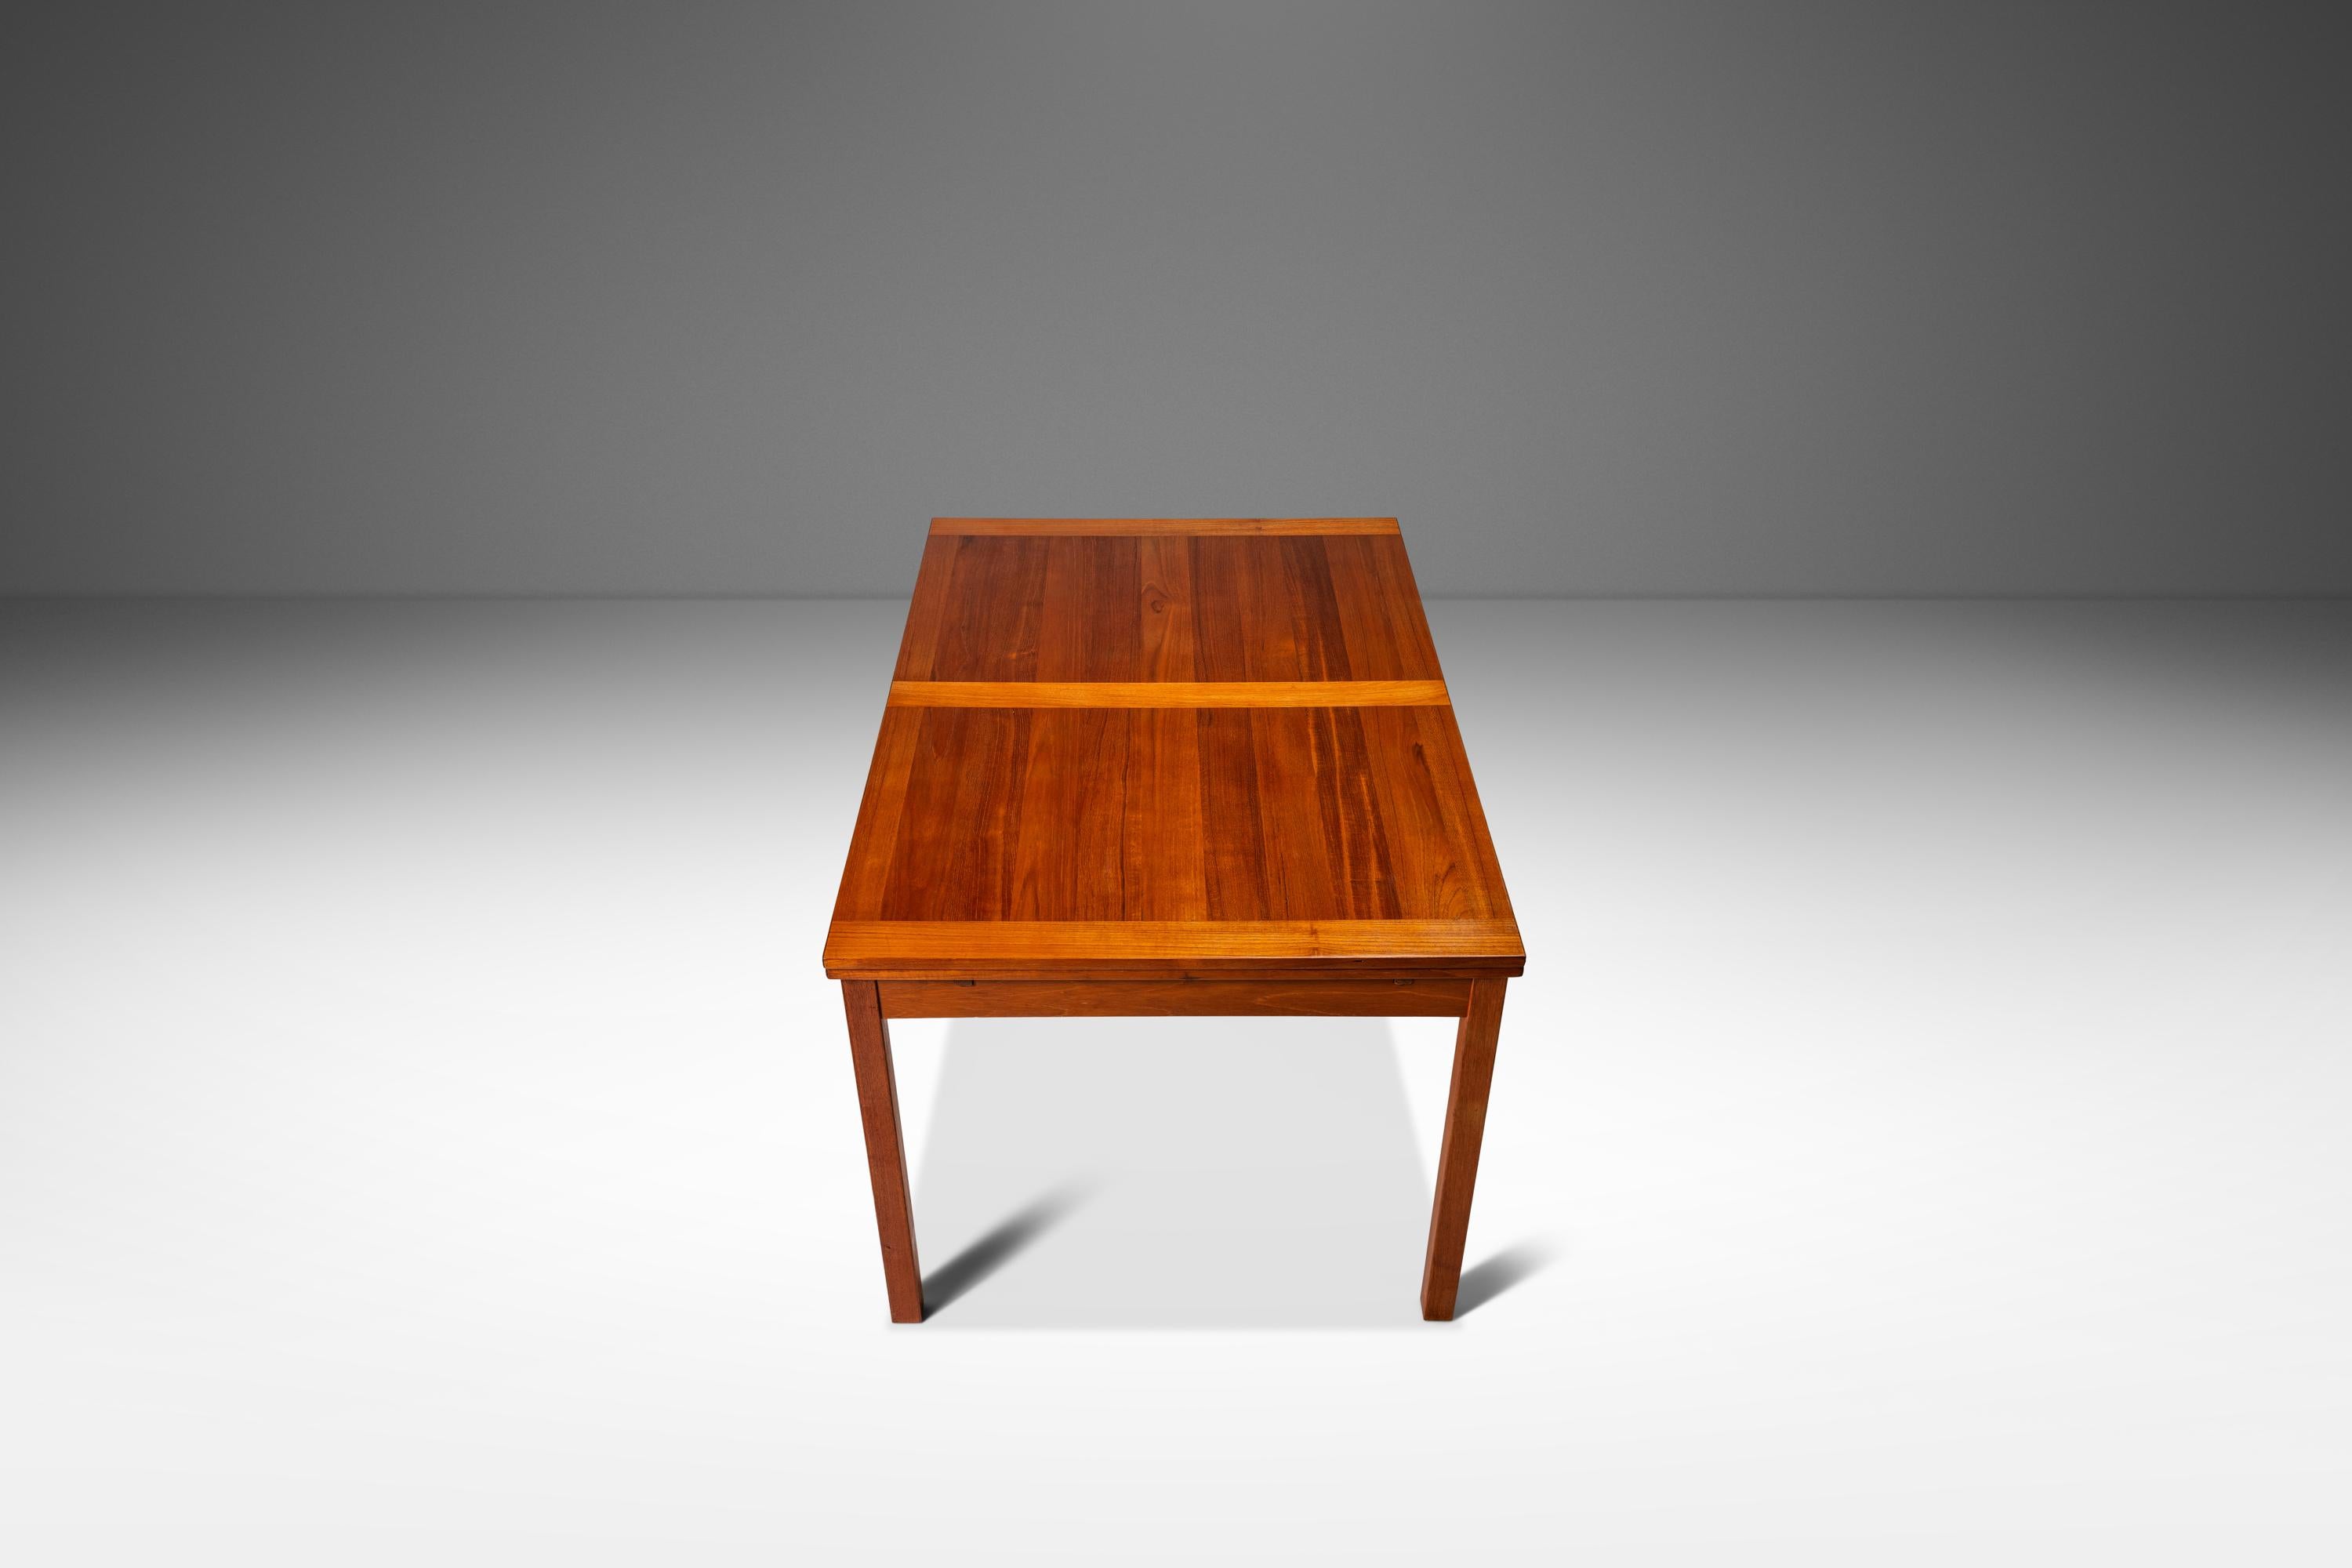 Mid-Century Modern Danish Teak Extension Dining Table with Stow-in-Table Leaves, Denmark, c. 1970s For Sale